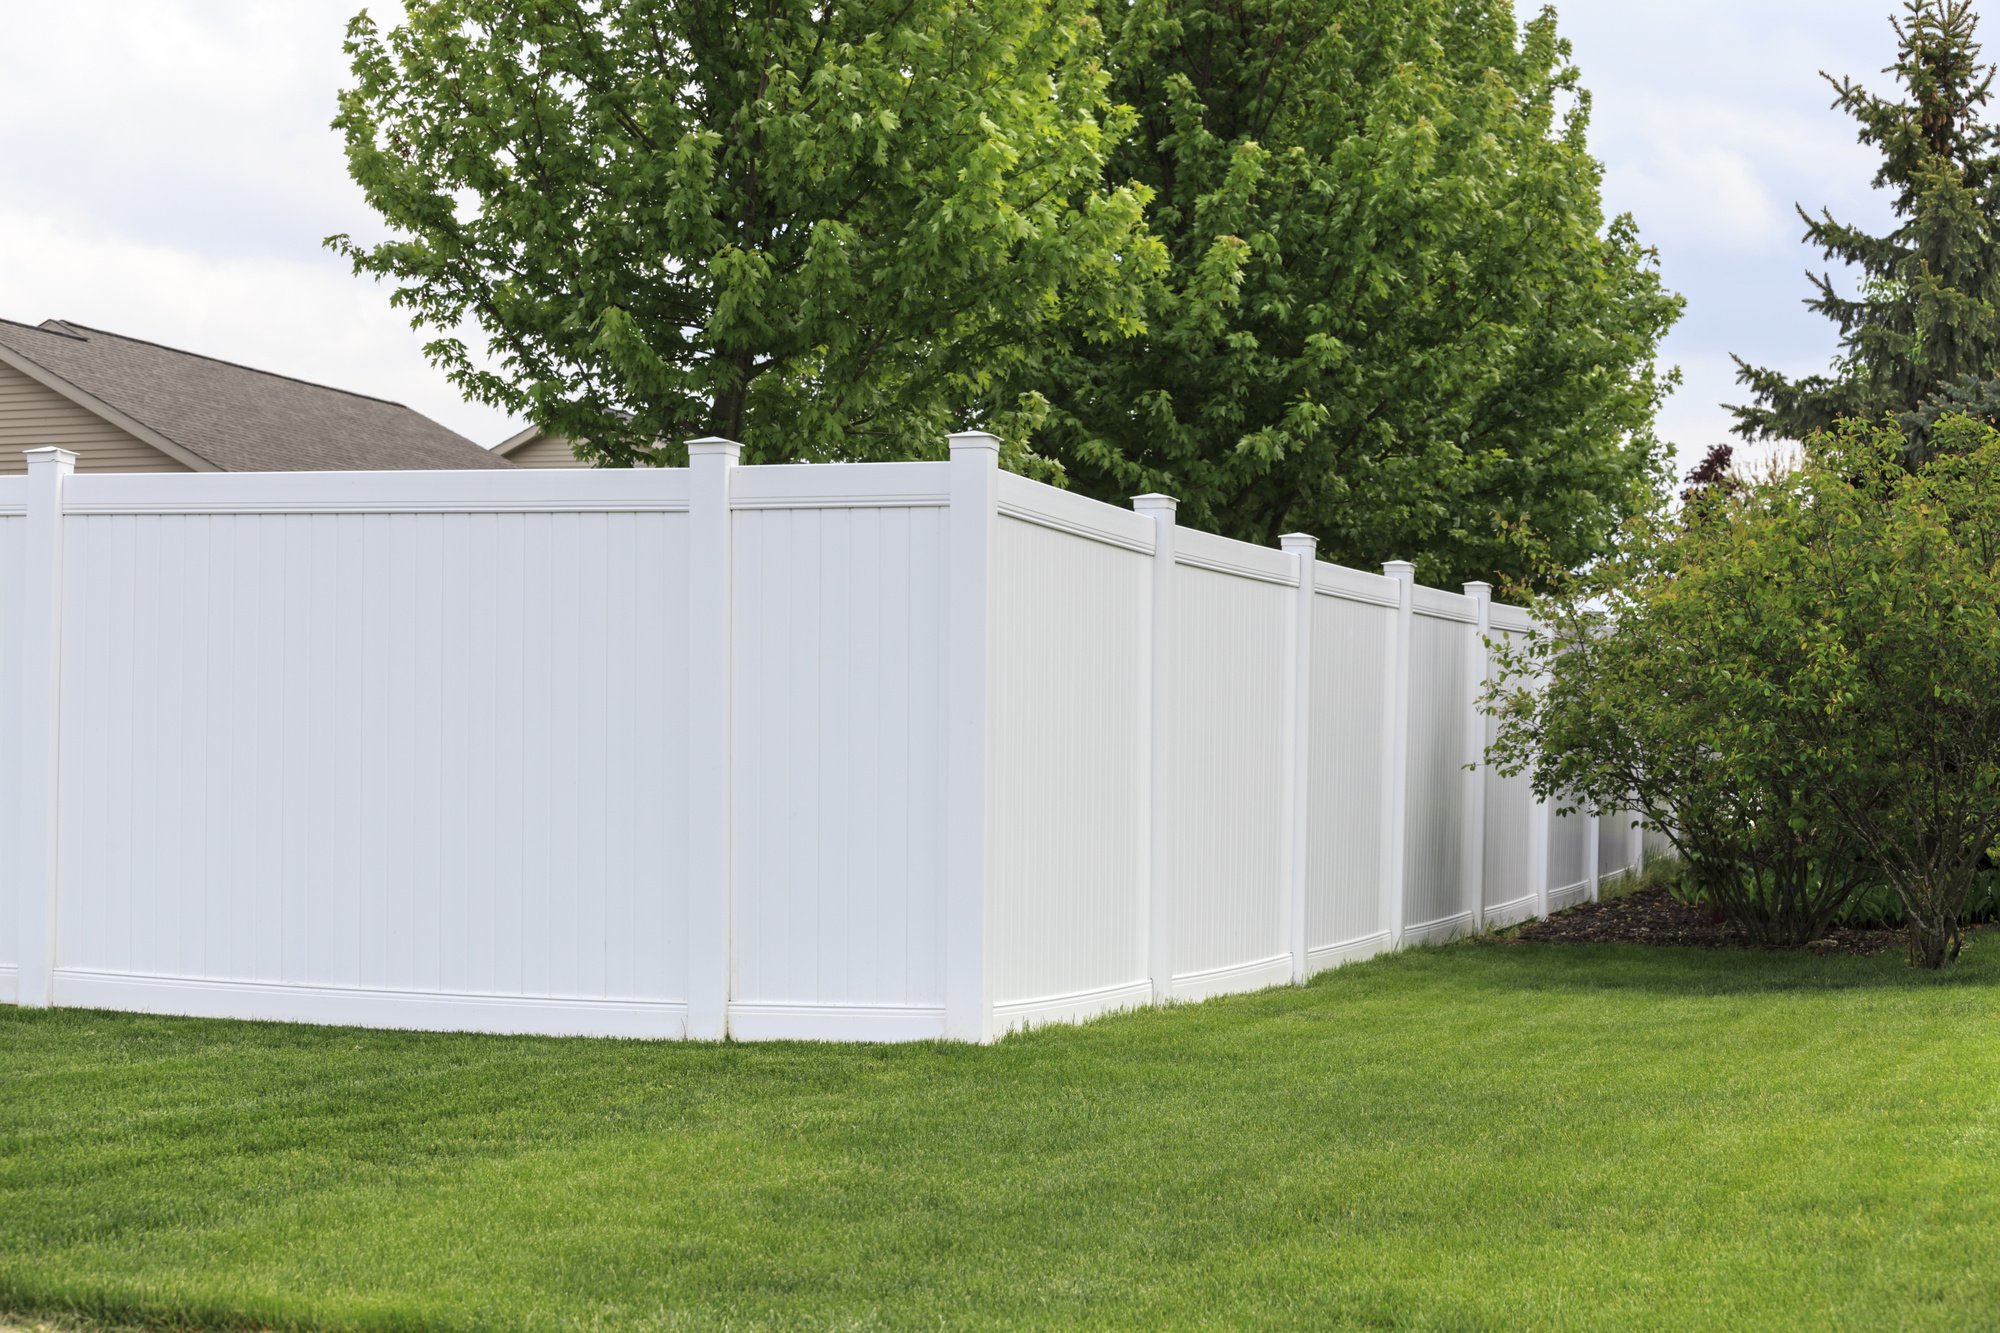 A vinyl fence doesn't have to be white. Learn what your best options are for a colored vinyl fence that matches your home style here.